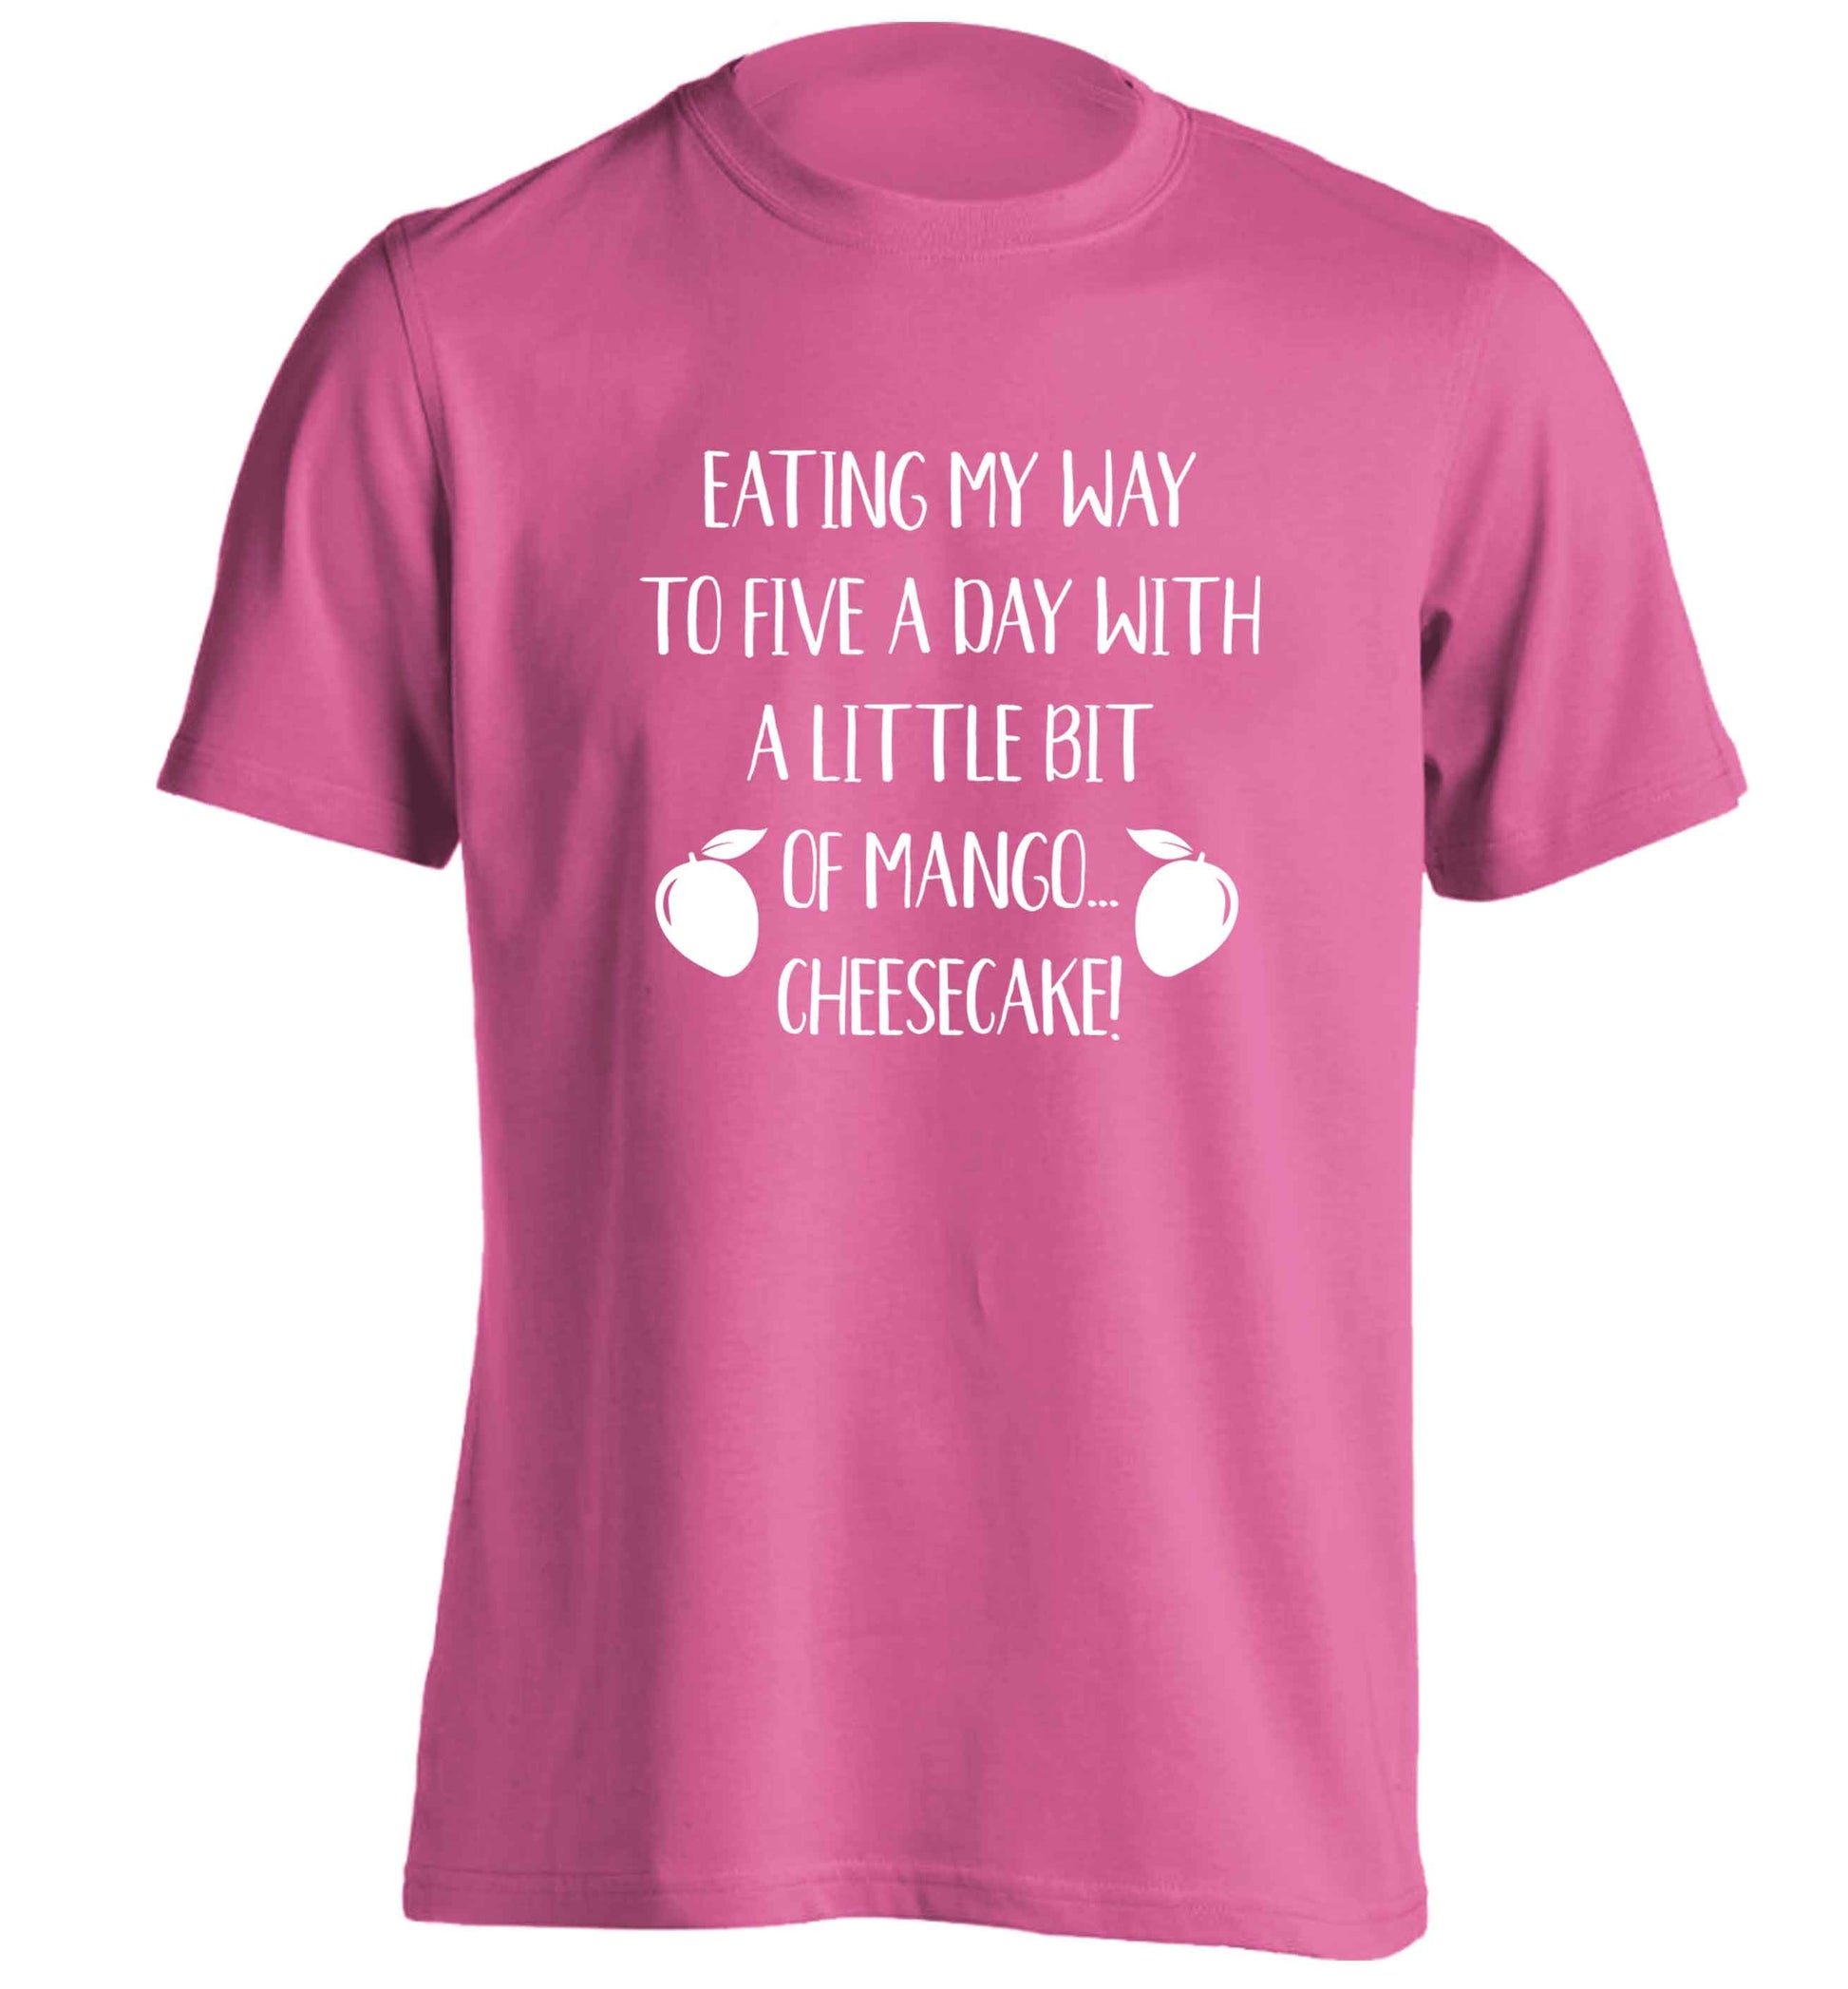 Eating my way to five a day with a little bit of mango cheesecake adults unisex pink Tshirt 2XL